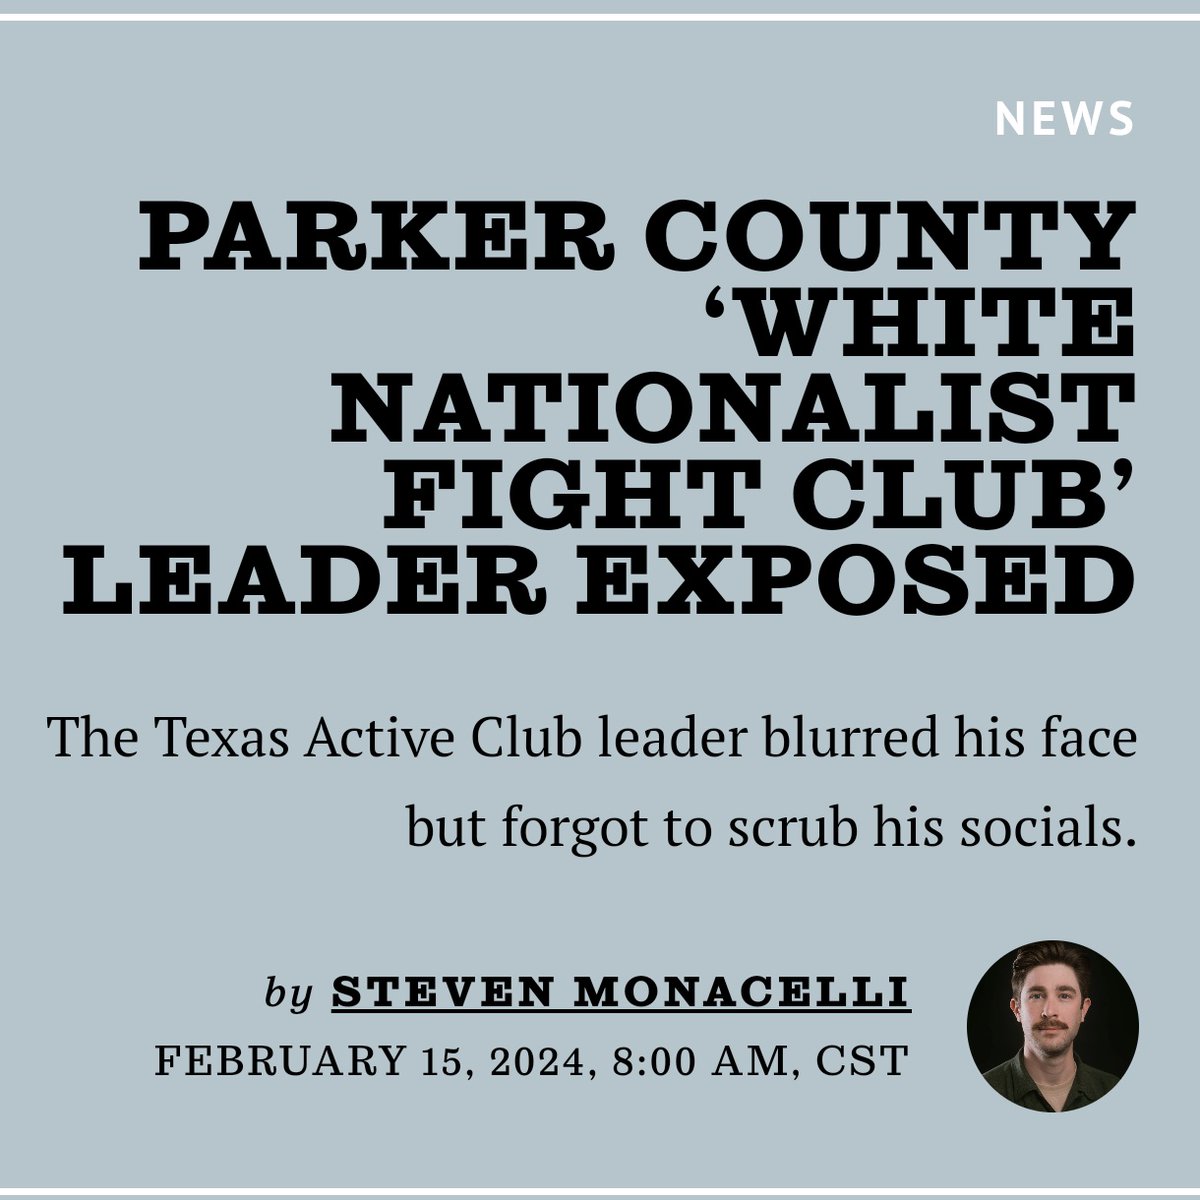 Antisemitic flyers recently distributed in Hood County, Texas are associated with the Goyim Defense League, a neo-Nazi group with several north Texas members who I recently identified. Hood County is adjacent to Parker County, which is now home to a white nationalist active club.